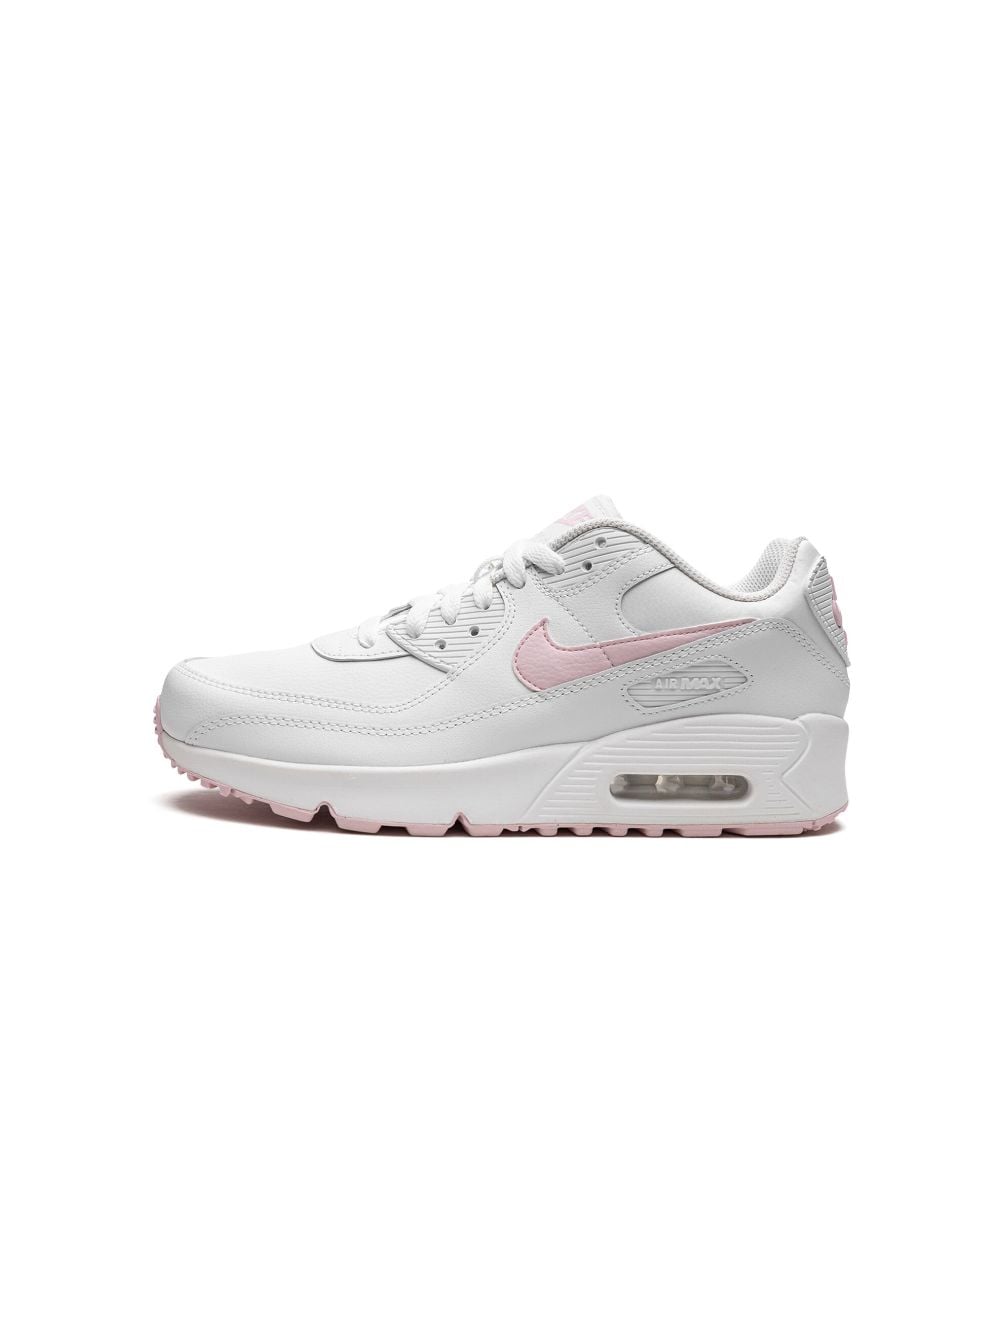 Shop Nike Air Max 90 Leather "white/pink Foam" Sneakers